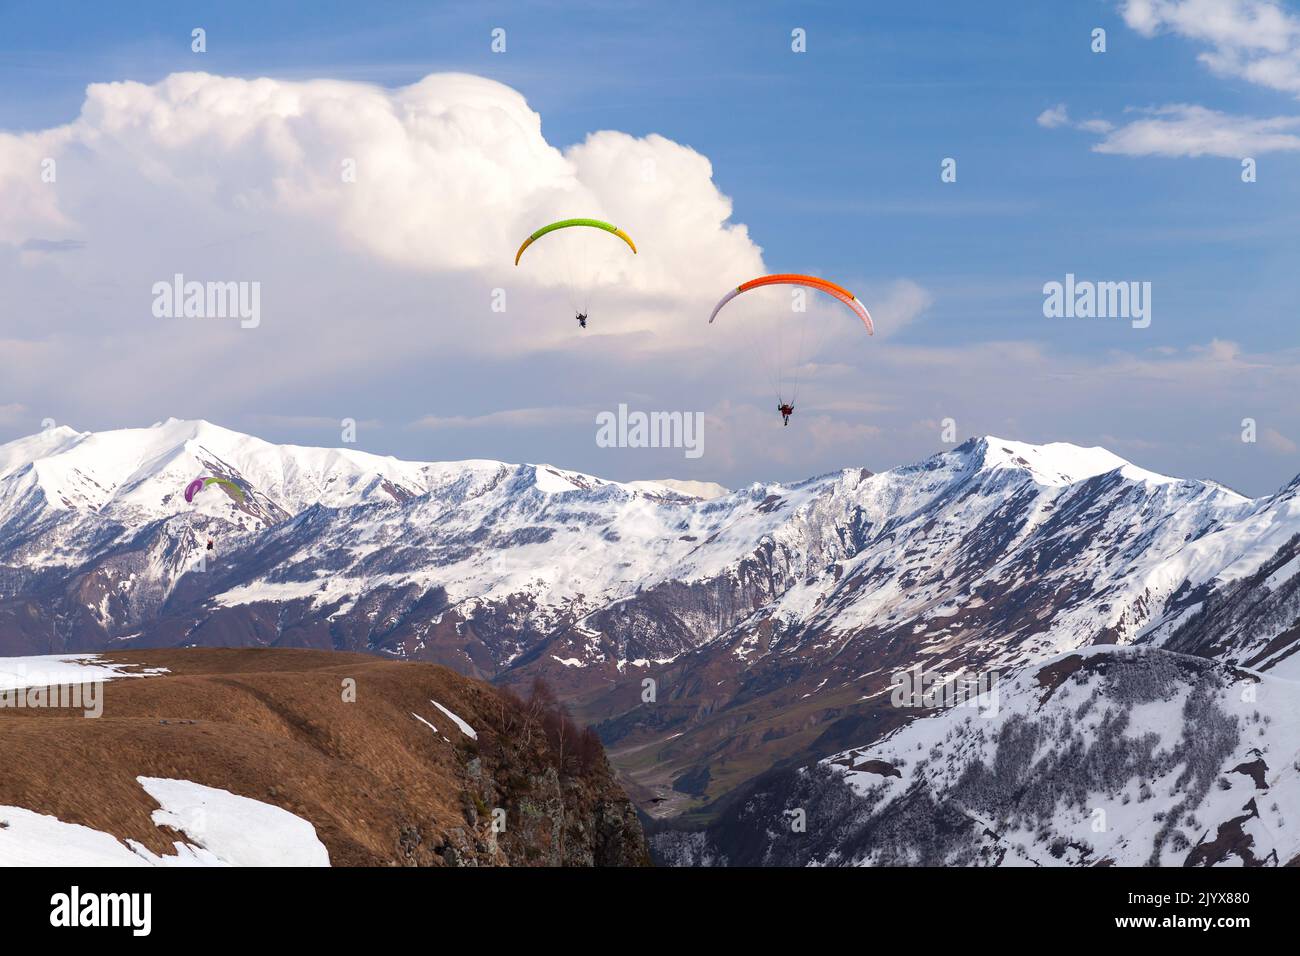 Mountain landscape with paragliders flying near snowy peaks of Caucasus on a daytime. Gudauri, Georgia Stock Photo